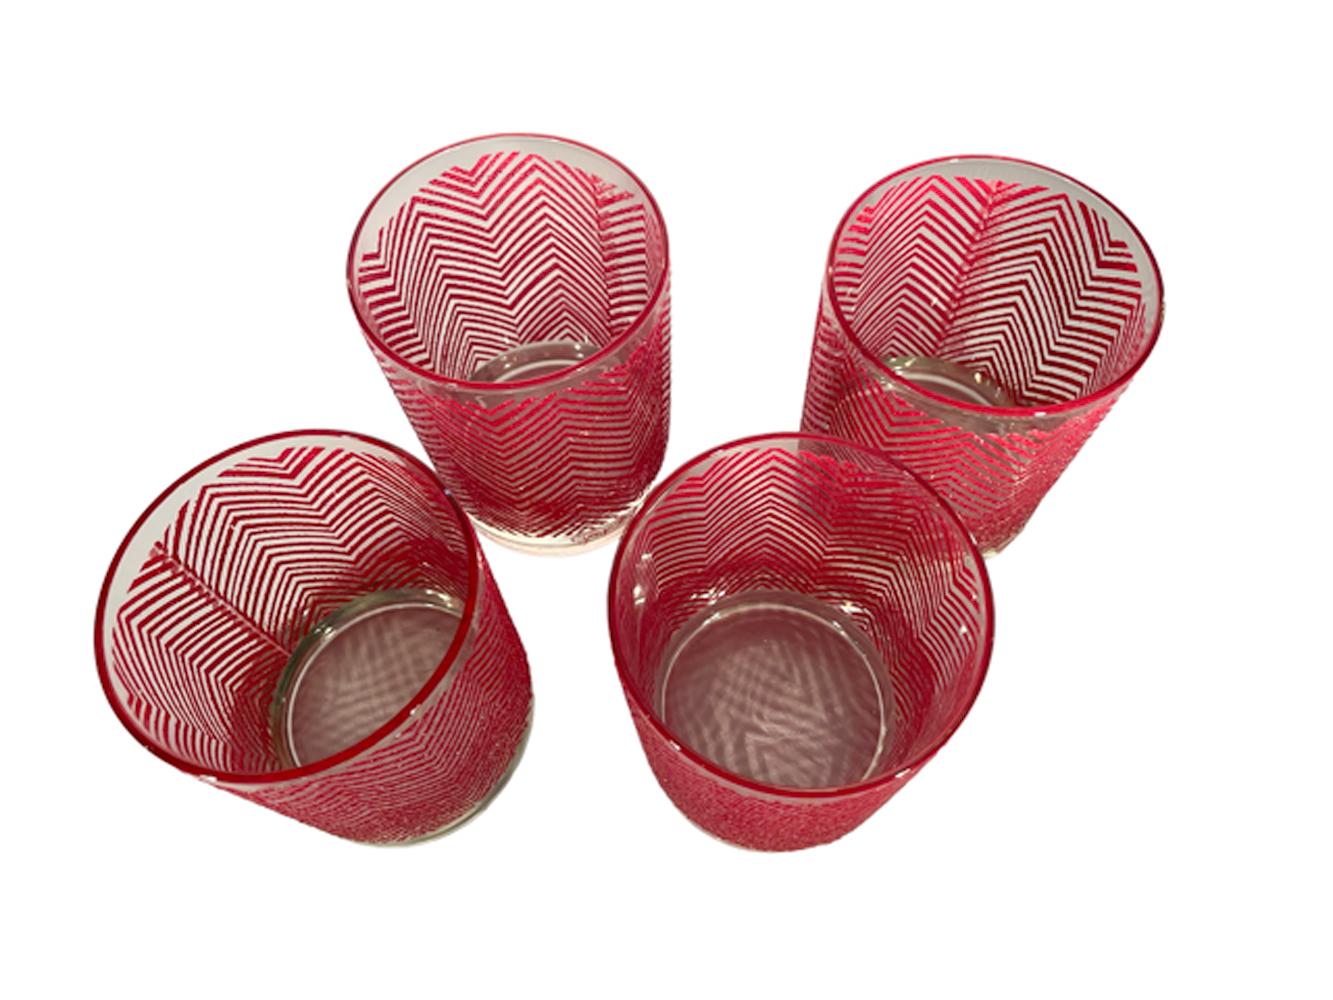 Set of 4 Georges Briard rocks glasses in a variant of his 'Icicle' pattern with red lines in raised textured frosty enamel arranged in a herringbone pattern.